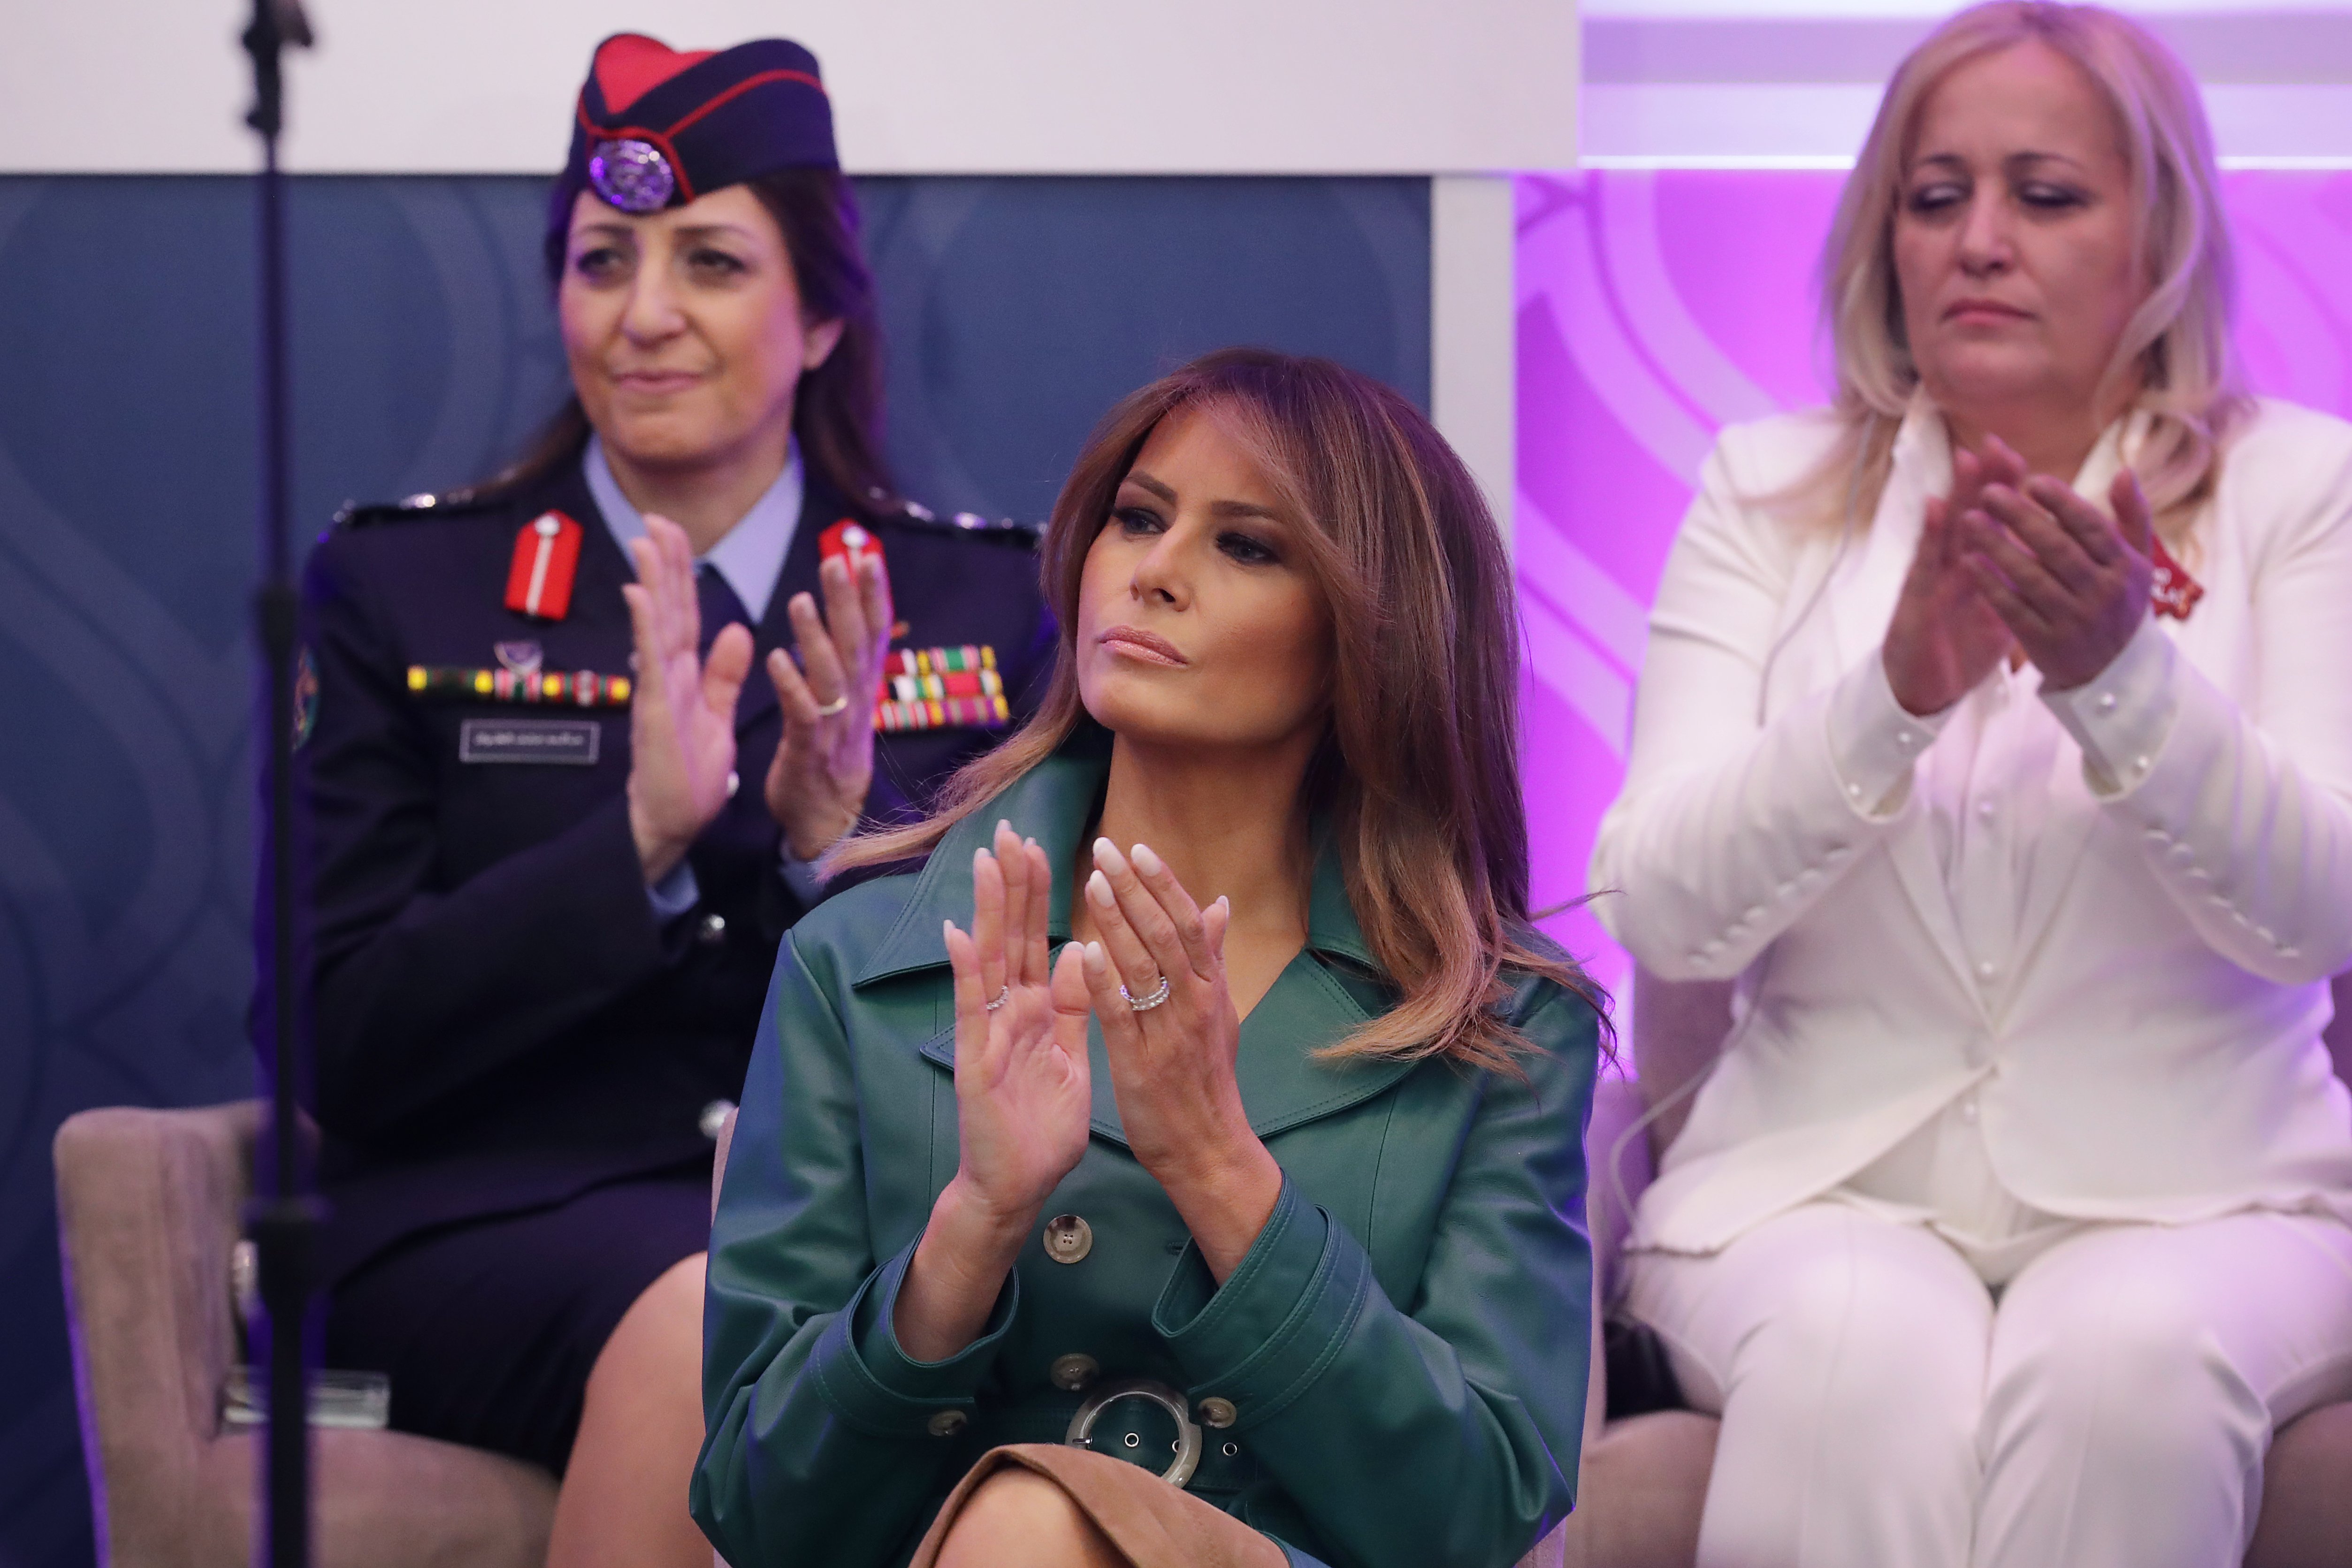 Melania Trump at the 2019 International Women of Courage celebration in Washington, D.C. | Photo: Getty Images